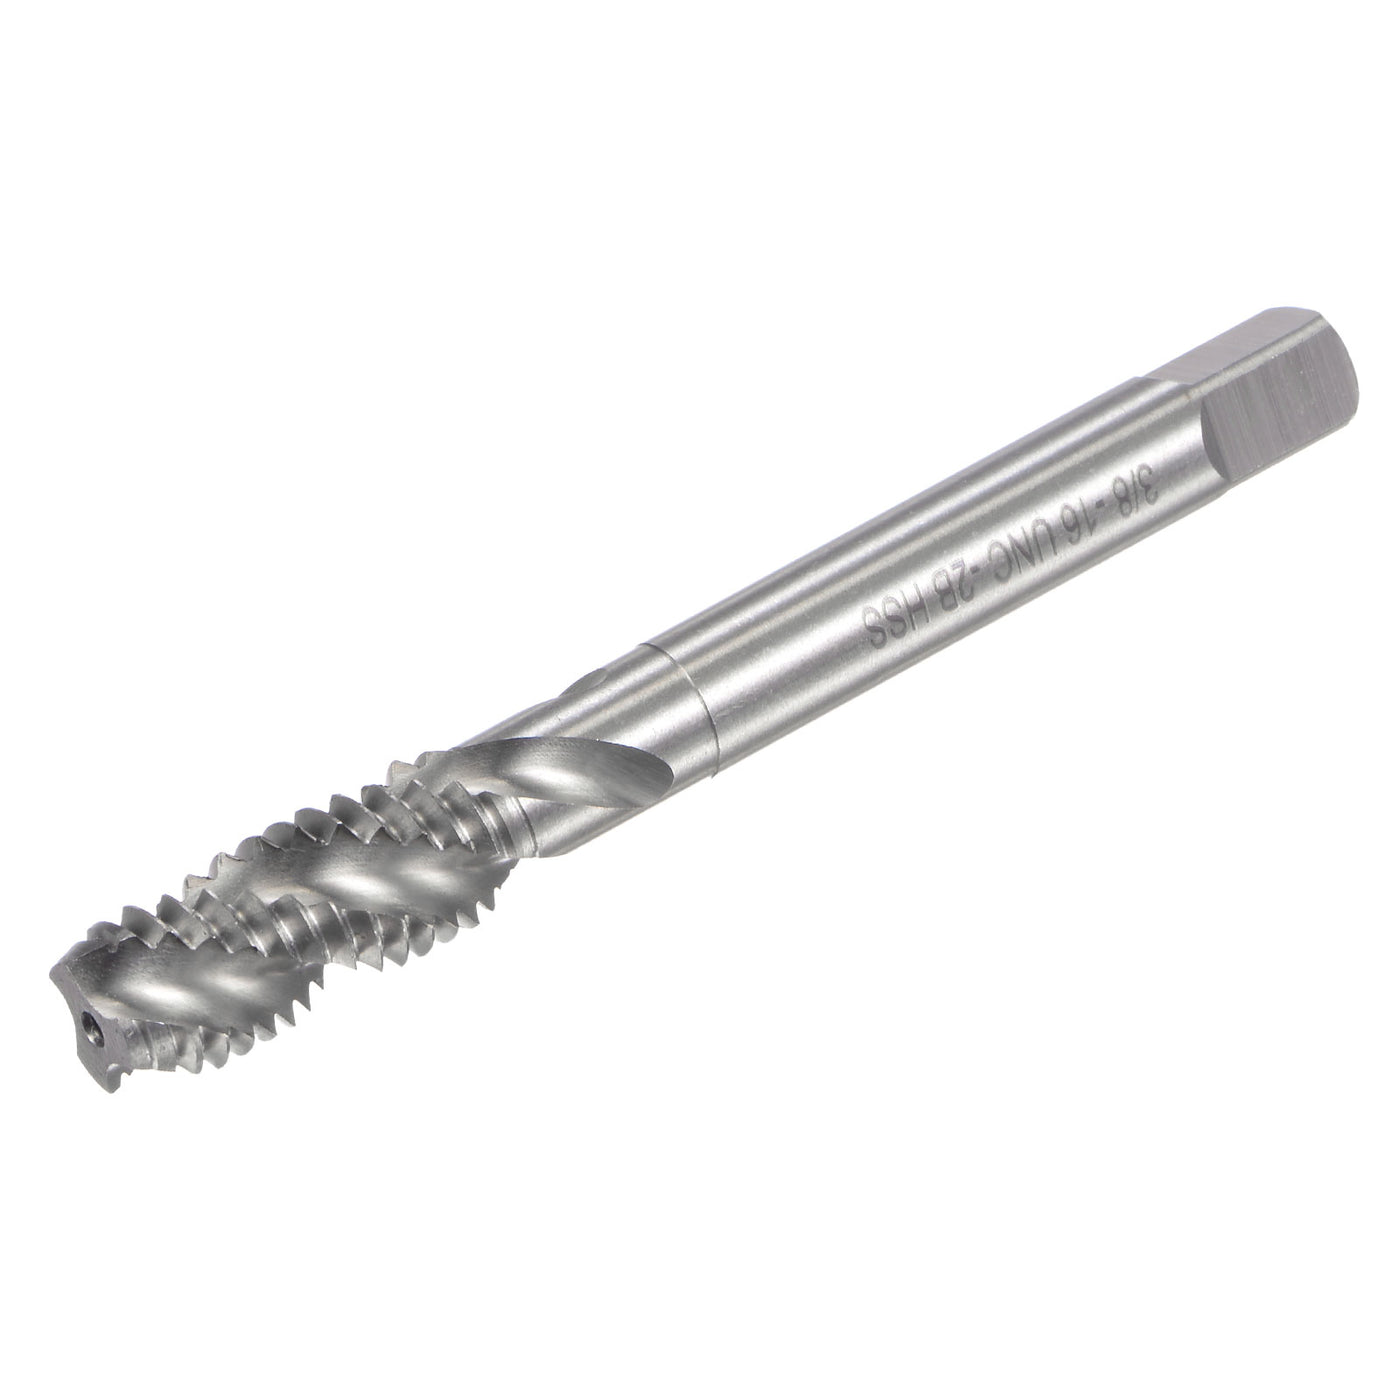 uxcell Uxcell 3/8-16 UNC 2B High Speed Steel Uncoated Machine Spiral Flutes Threading Tap